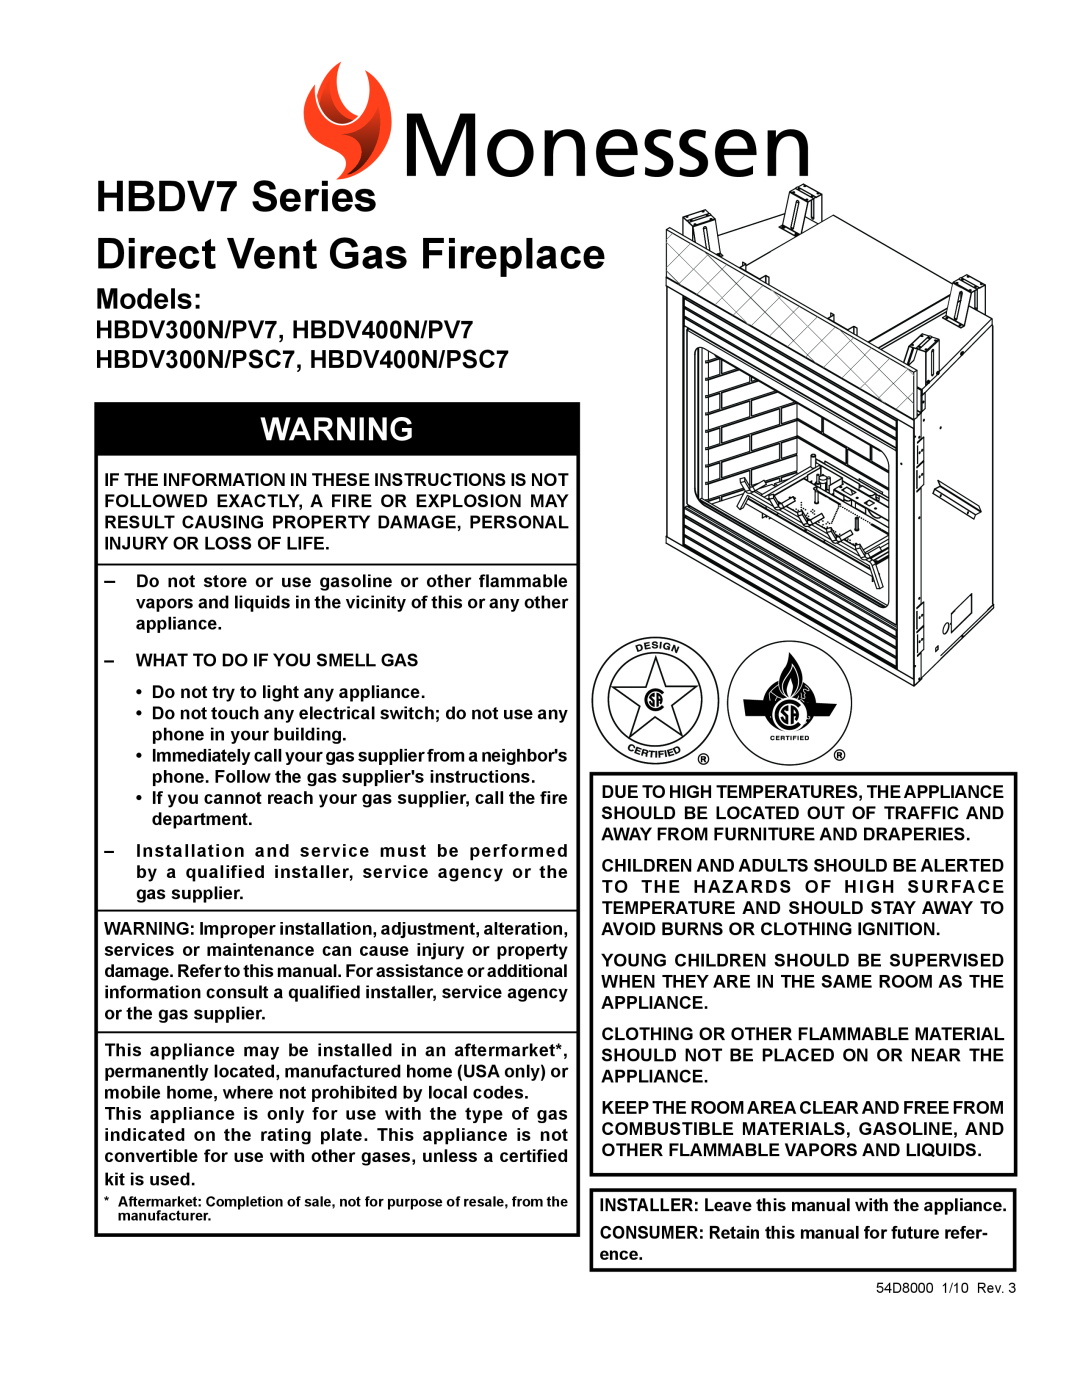 Monessen Hearth HBDV400N/PSC7 manual HBDV7 Series Direct Vent Gas Fireplace, Models, What To Do If You Smell Gas 